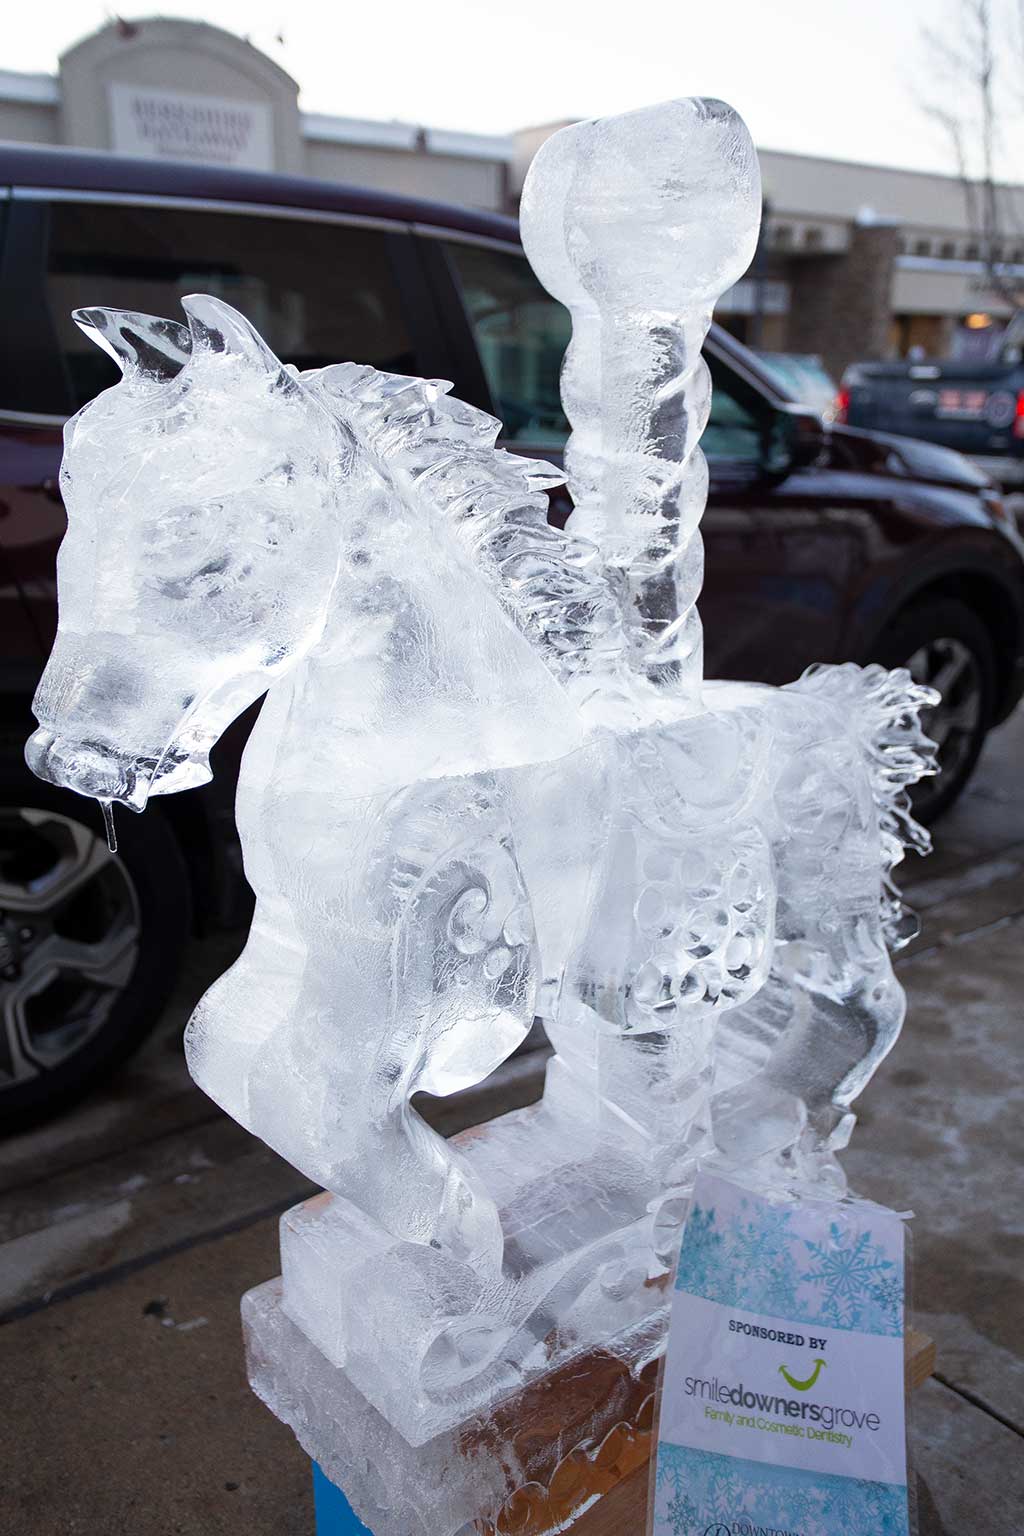 drive-swim-fly-downers-grove-chicago-illinois-ice-sculpture-downtown-businesses-carousel-horse